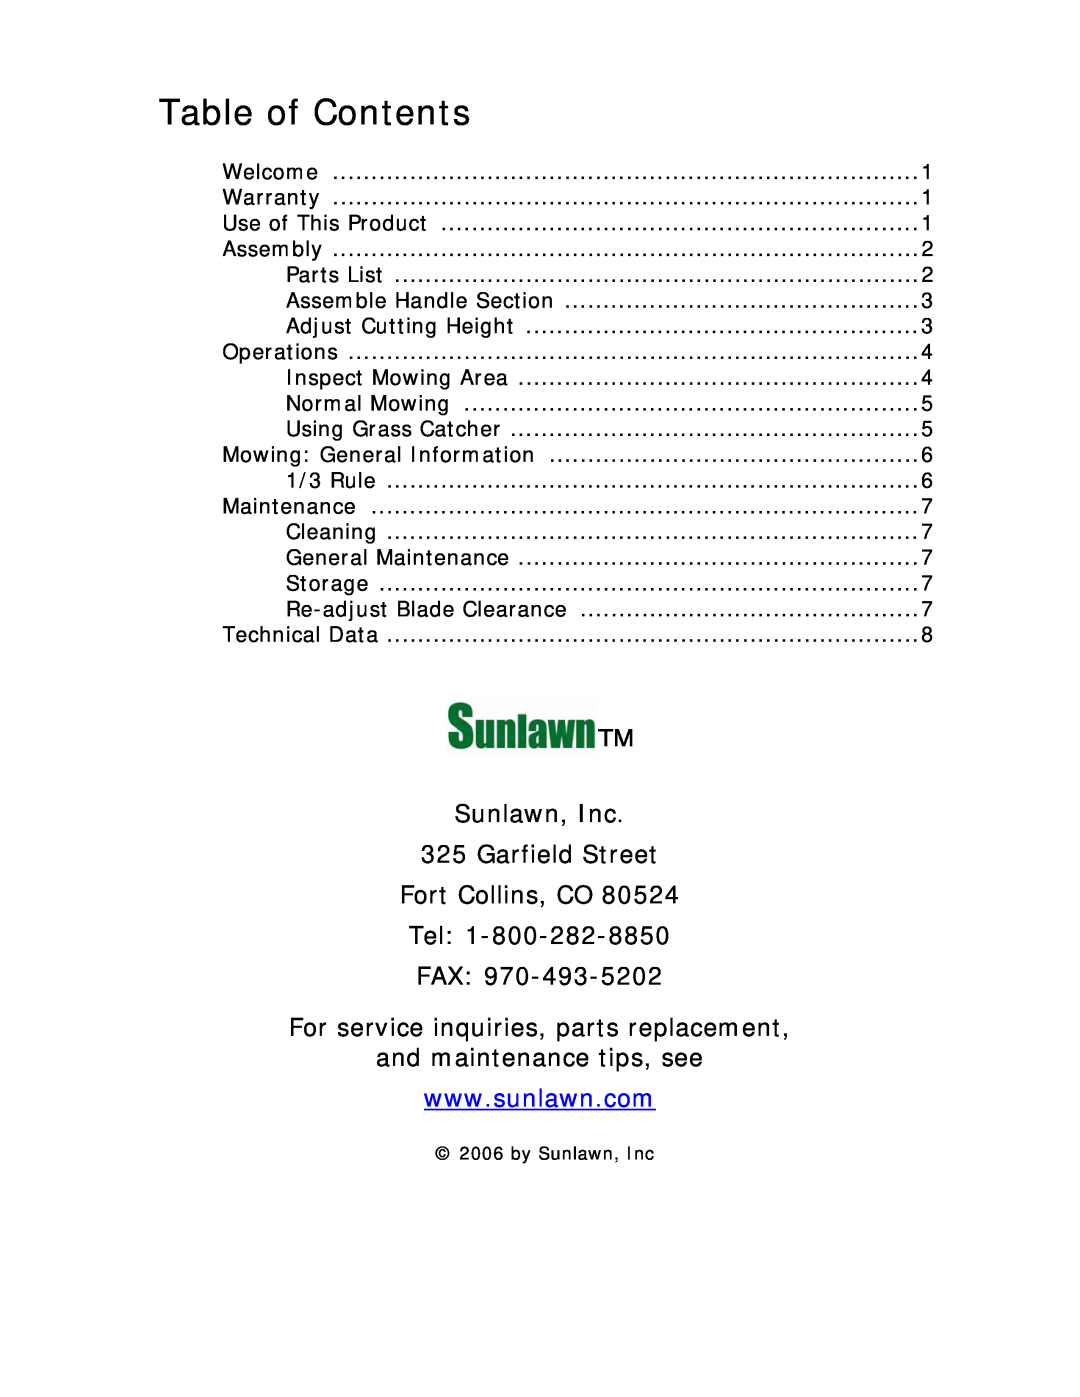 Sun Lawn MM-2 owner manual Table of Contents, Sunlawn, Inc 325 Garfield Street Fort Collins, CO Tel FAX 